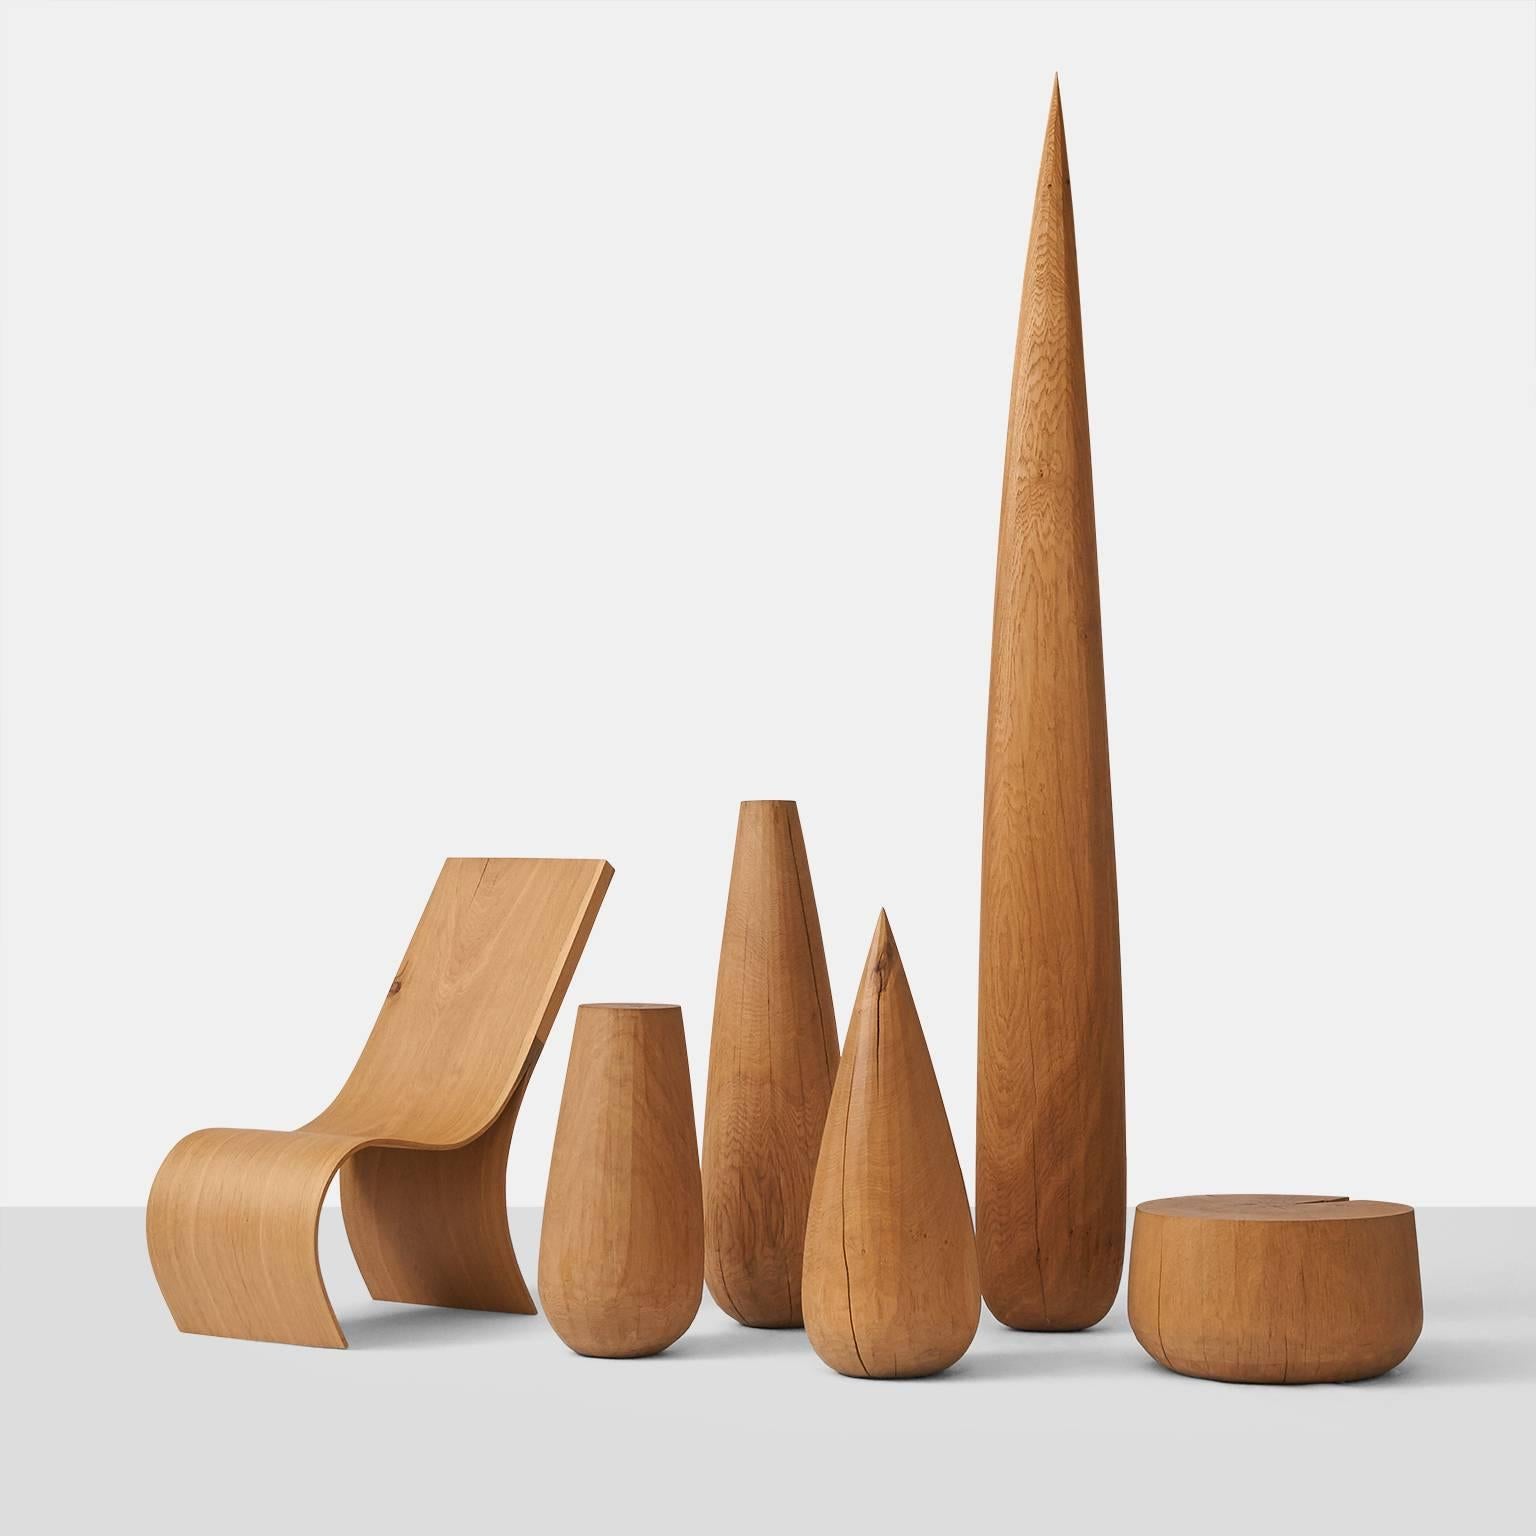 A collection of five monoliths created by German artist Kaspar Hamacher from solid pieces of oak tree trunks. Oak is from naturally fallen trees. Tallest item is 93